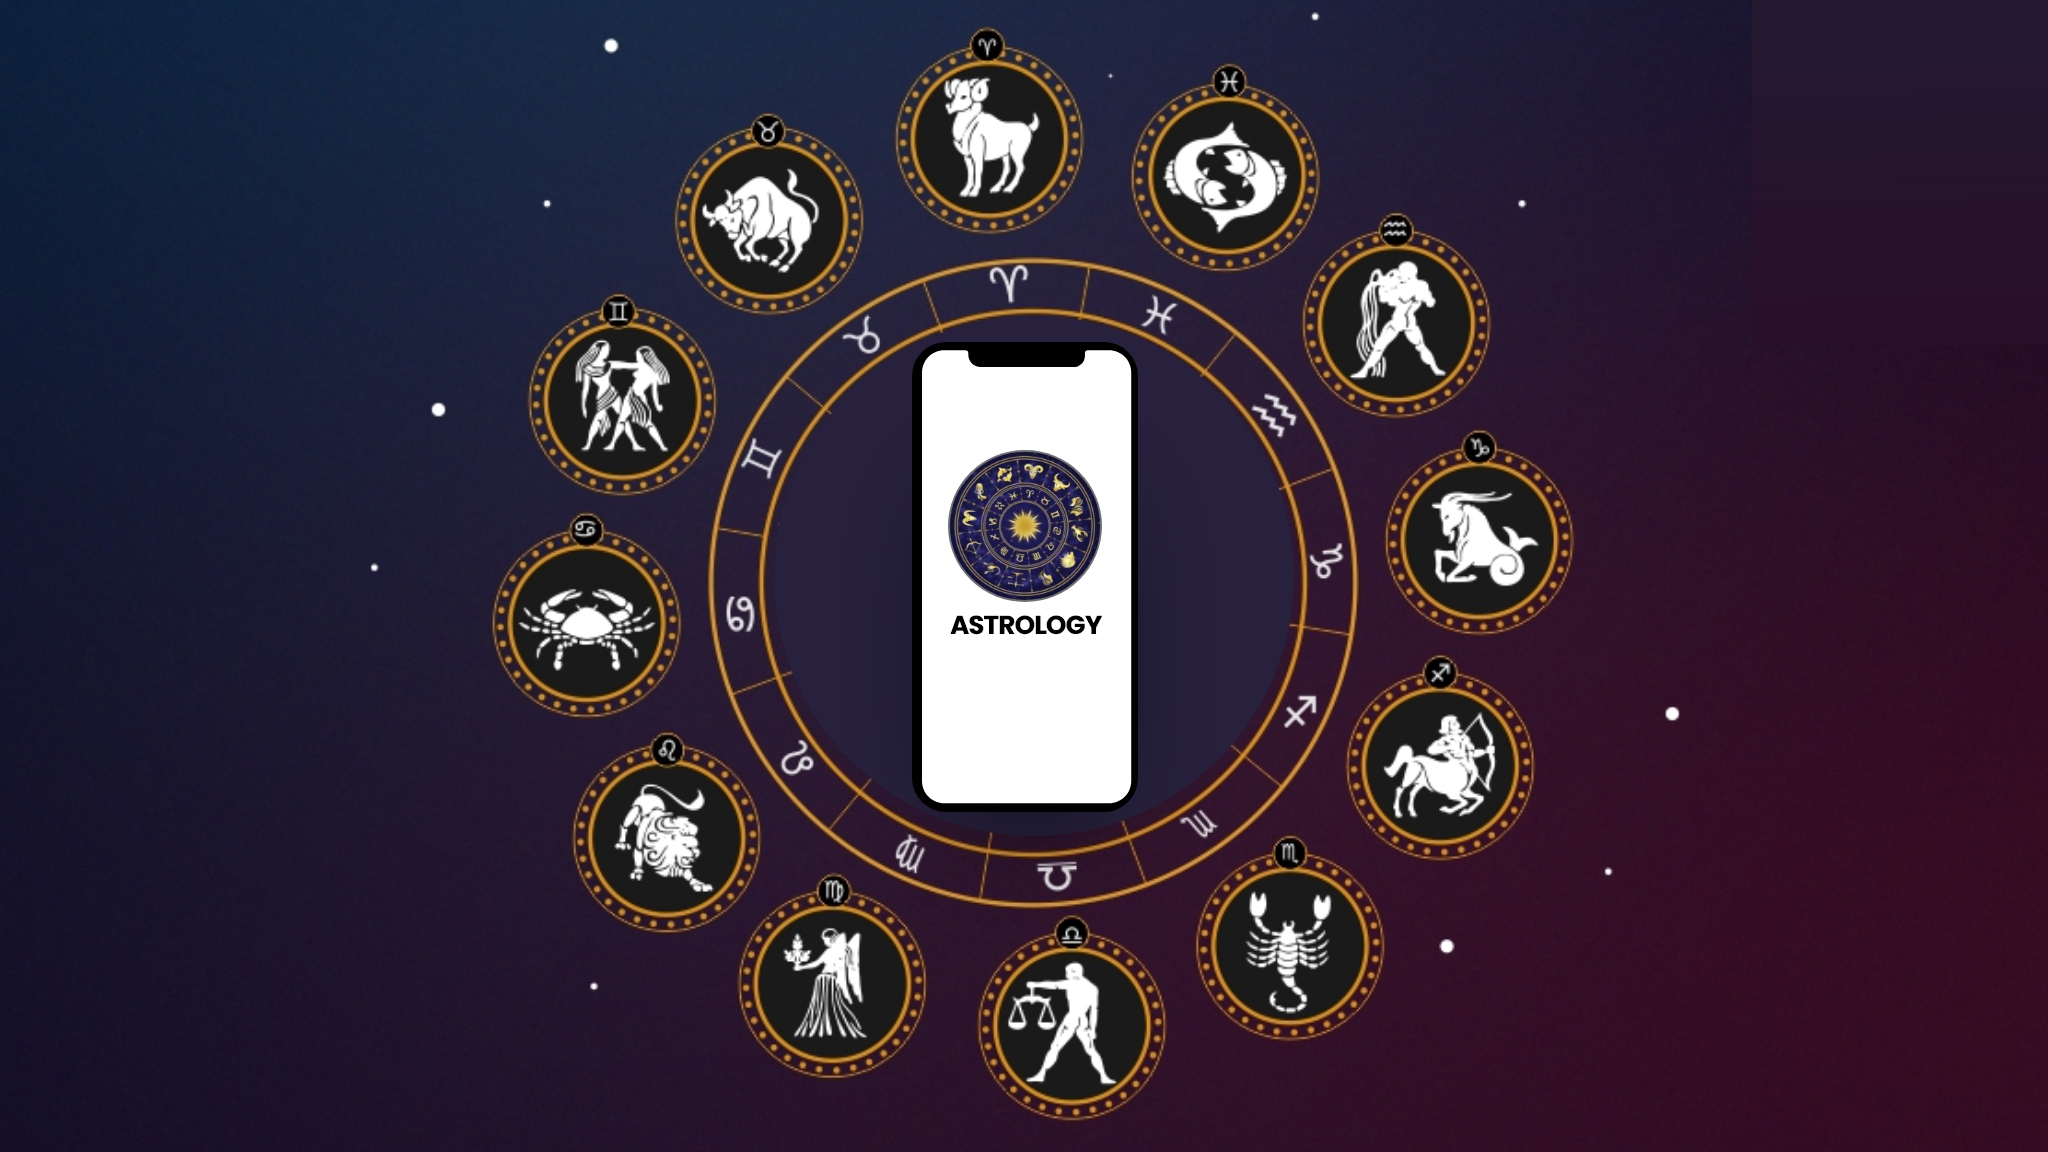 Learn About Astrology App Development to Make App like The Daily Horoscope